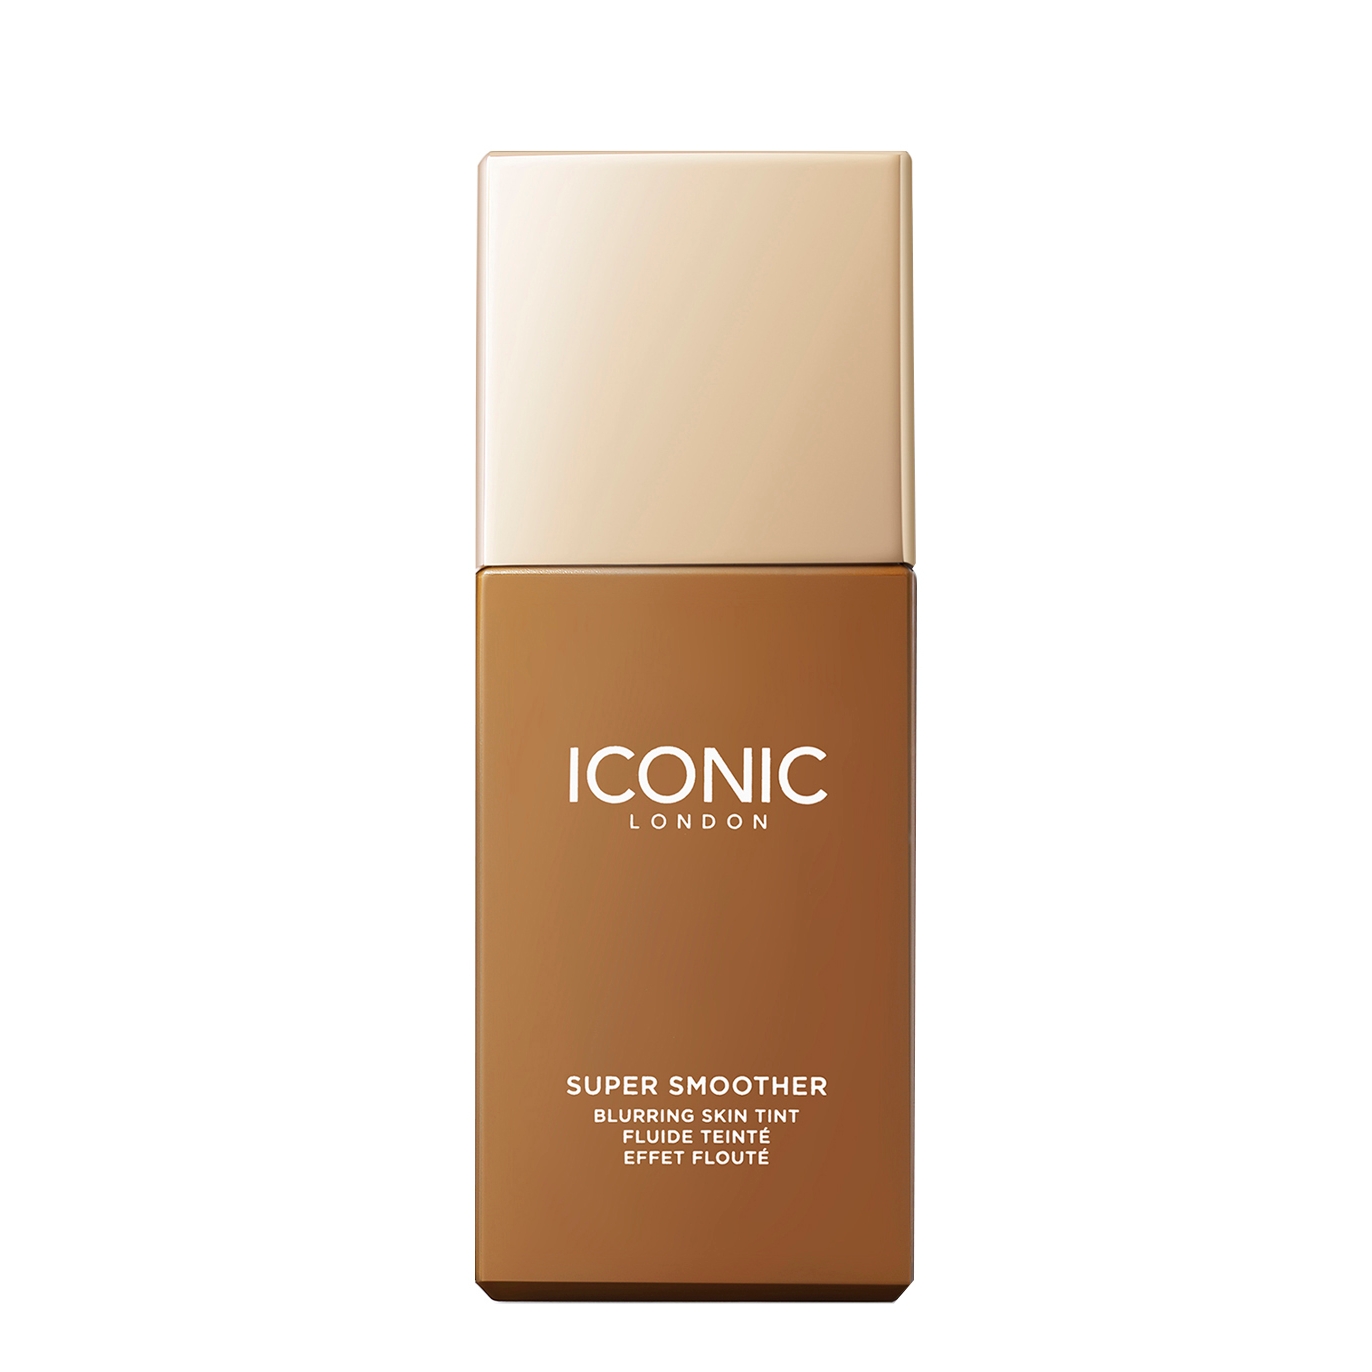 Iconic London Super Smoother Blurring Skin Tint - Colour Neutral Deep